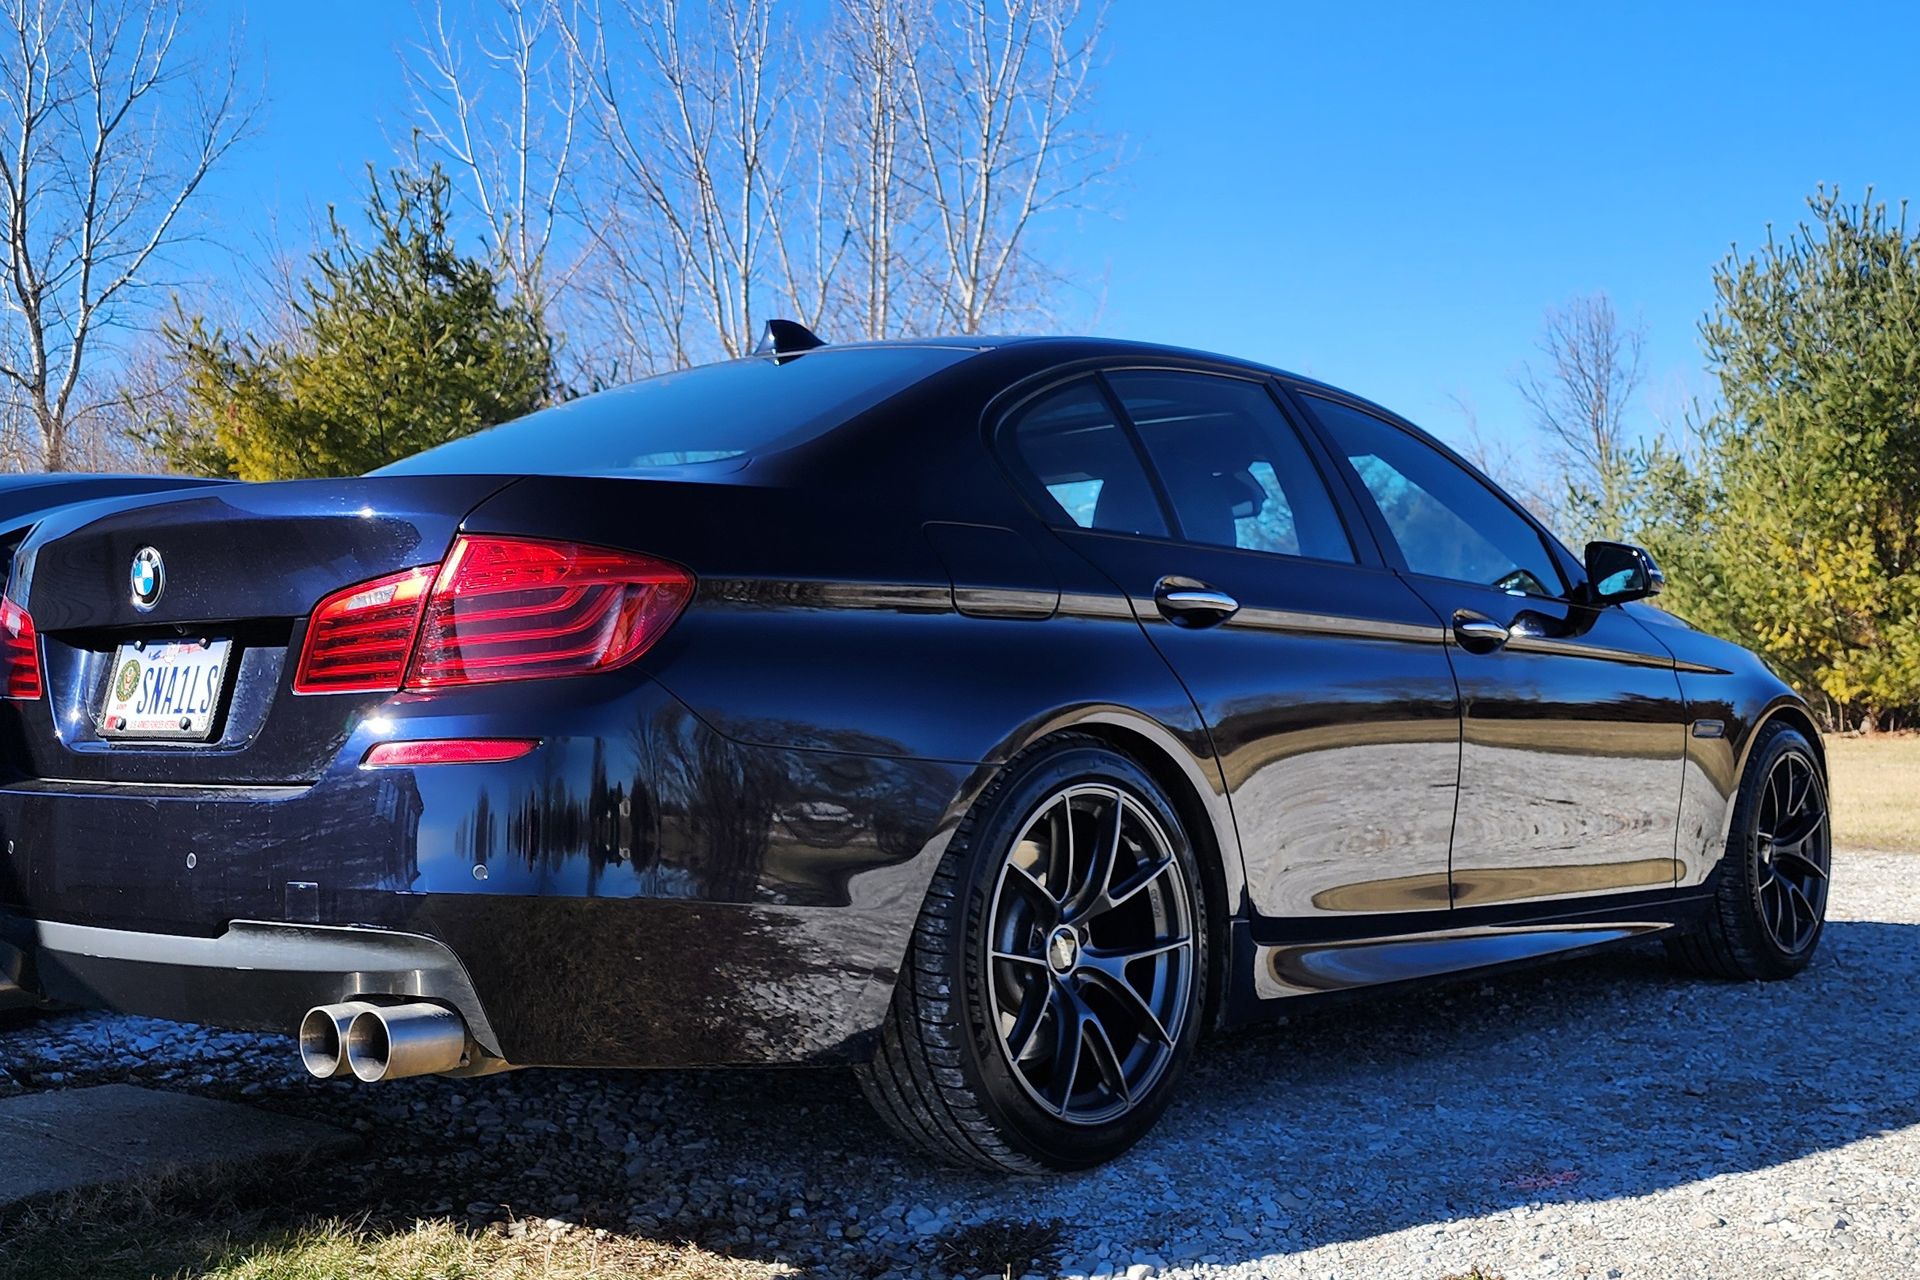 BMW F10 Sedan 5 Series with 19" VS-5RS in Anthracite